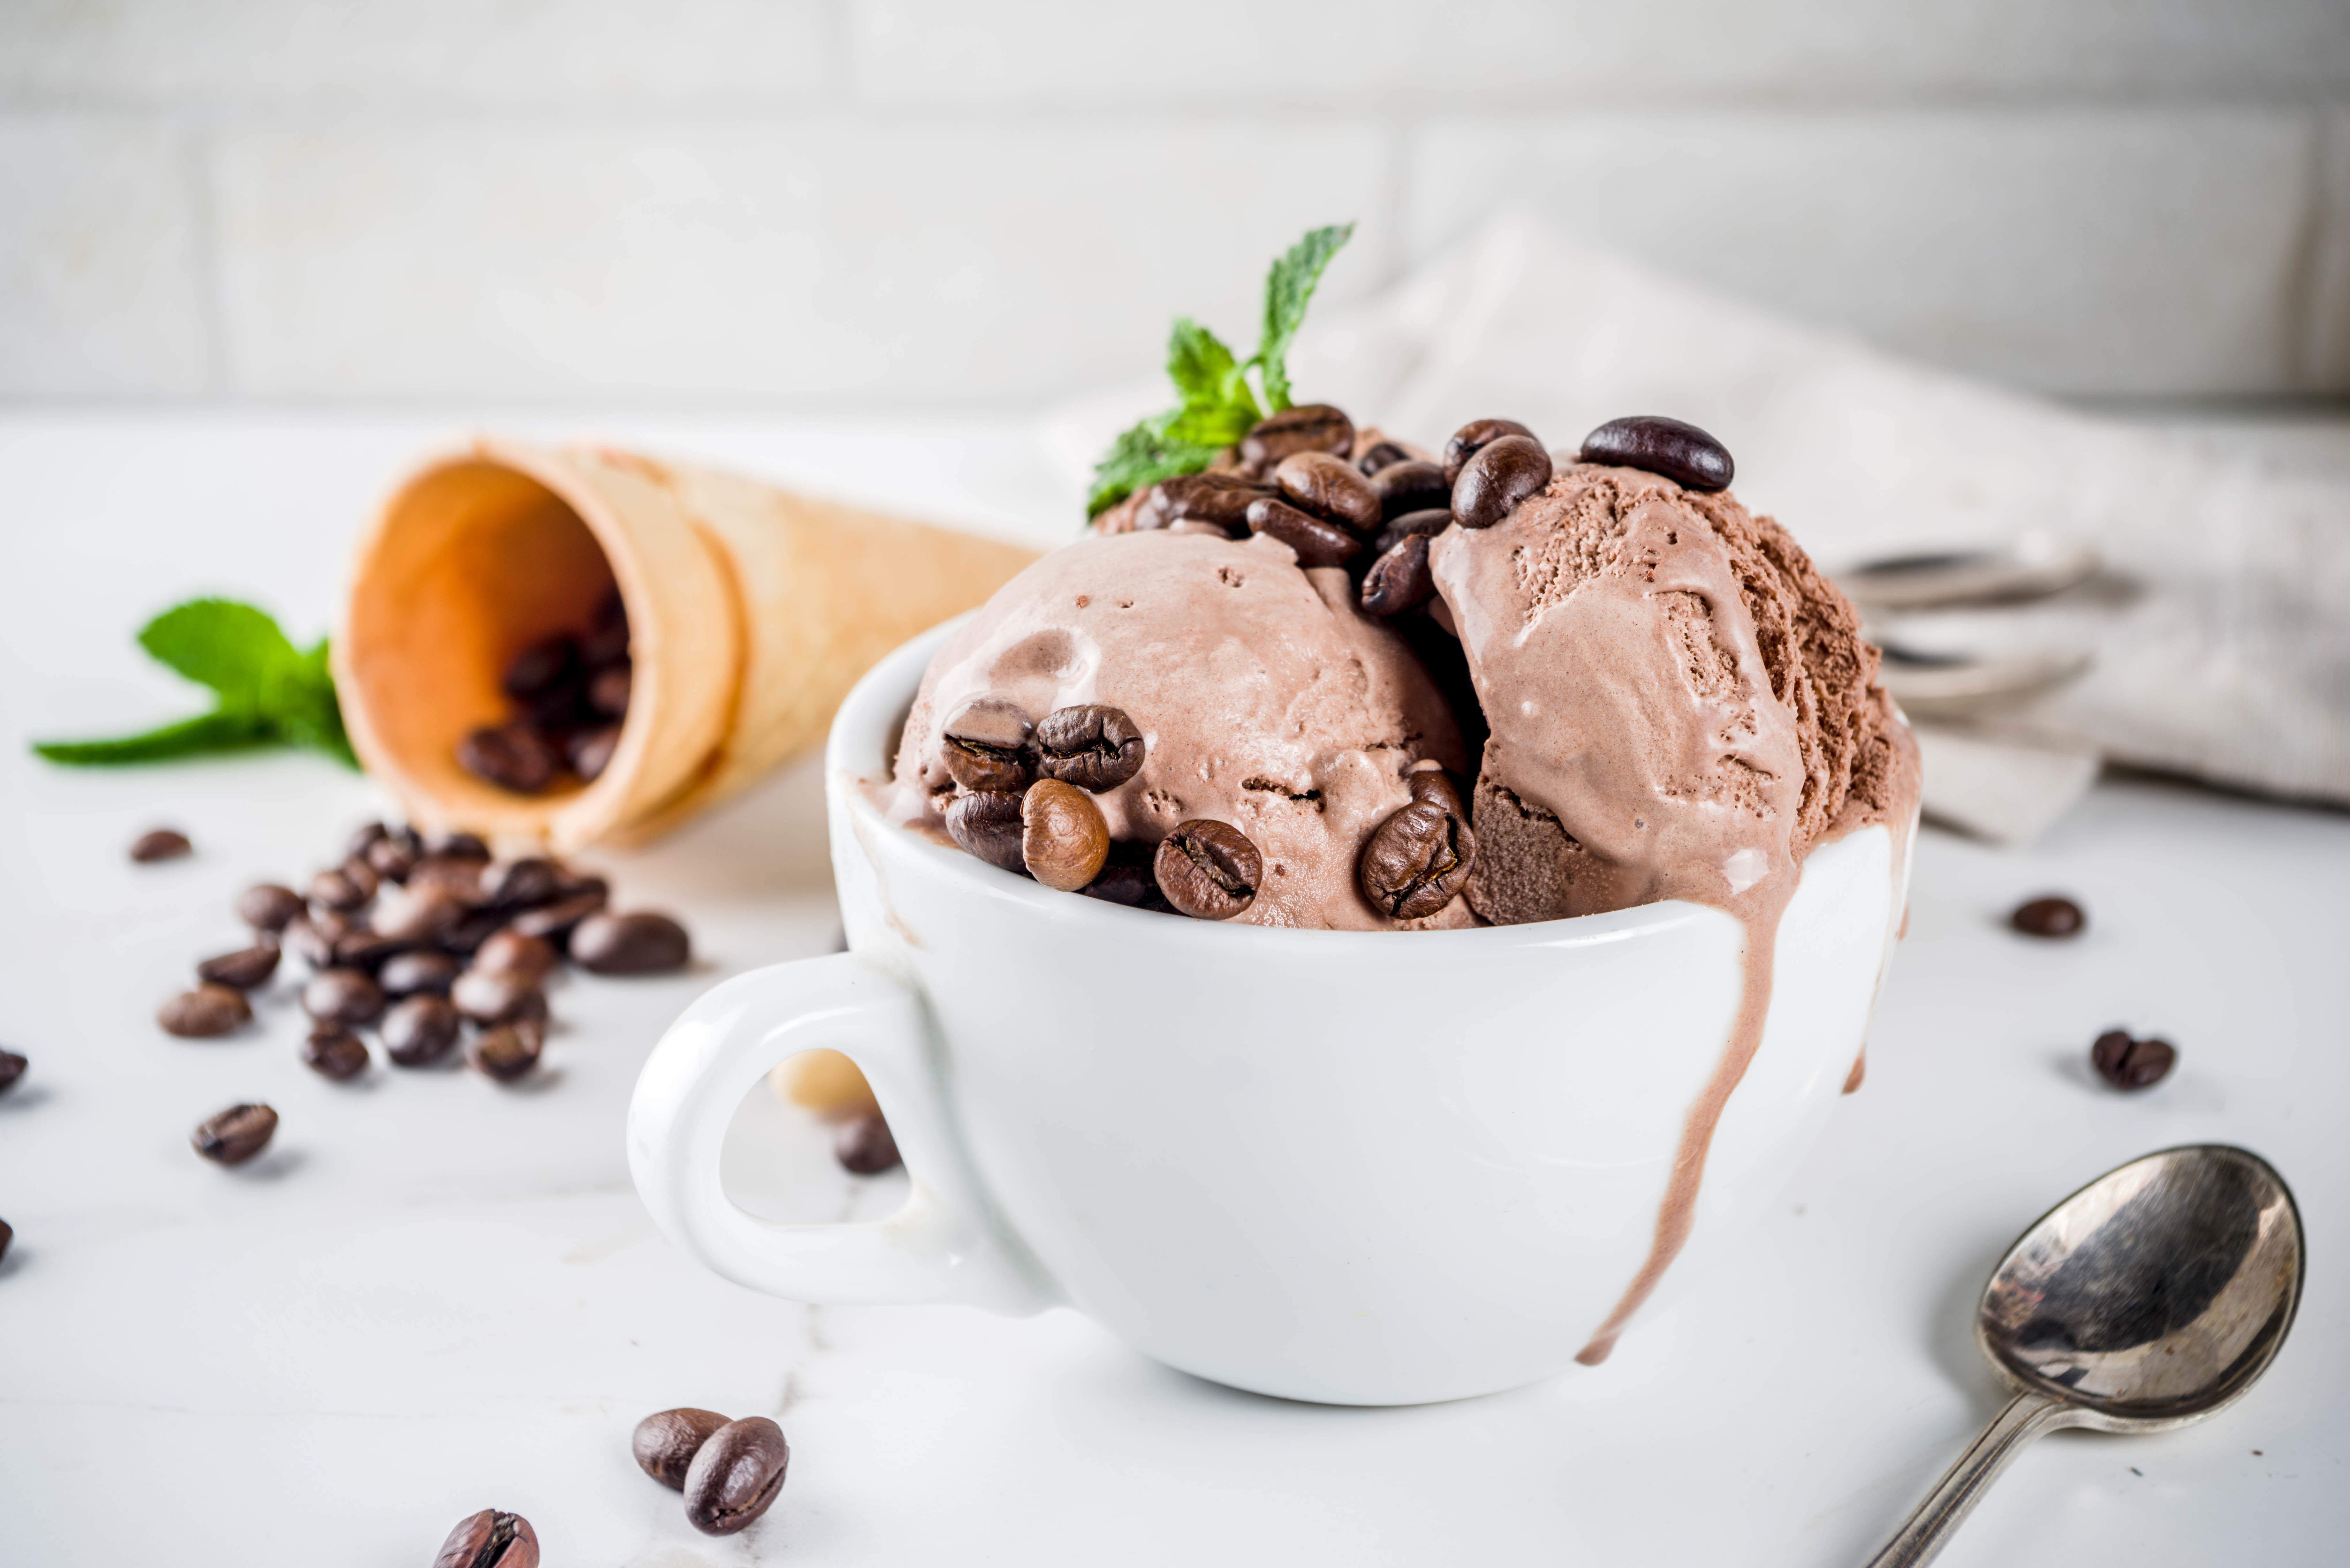 Homemade Coffee Ice Cream Served With Coffee Beans And Mint Leaves